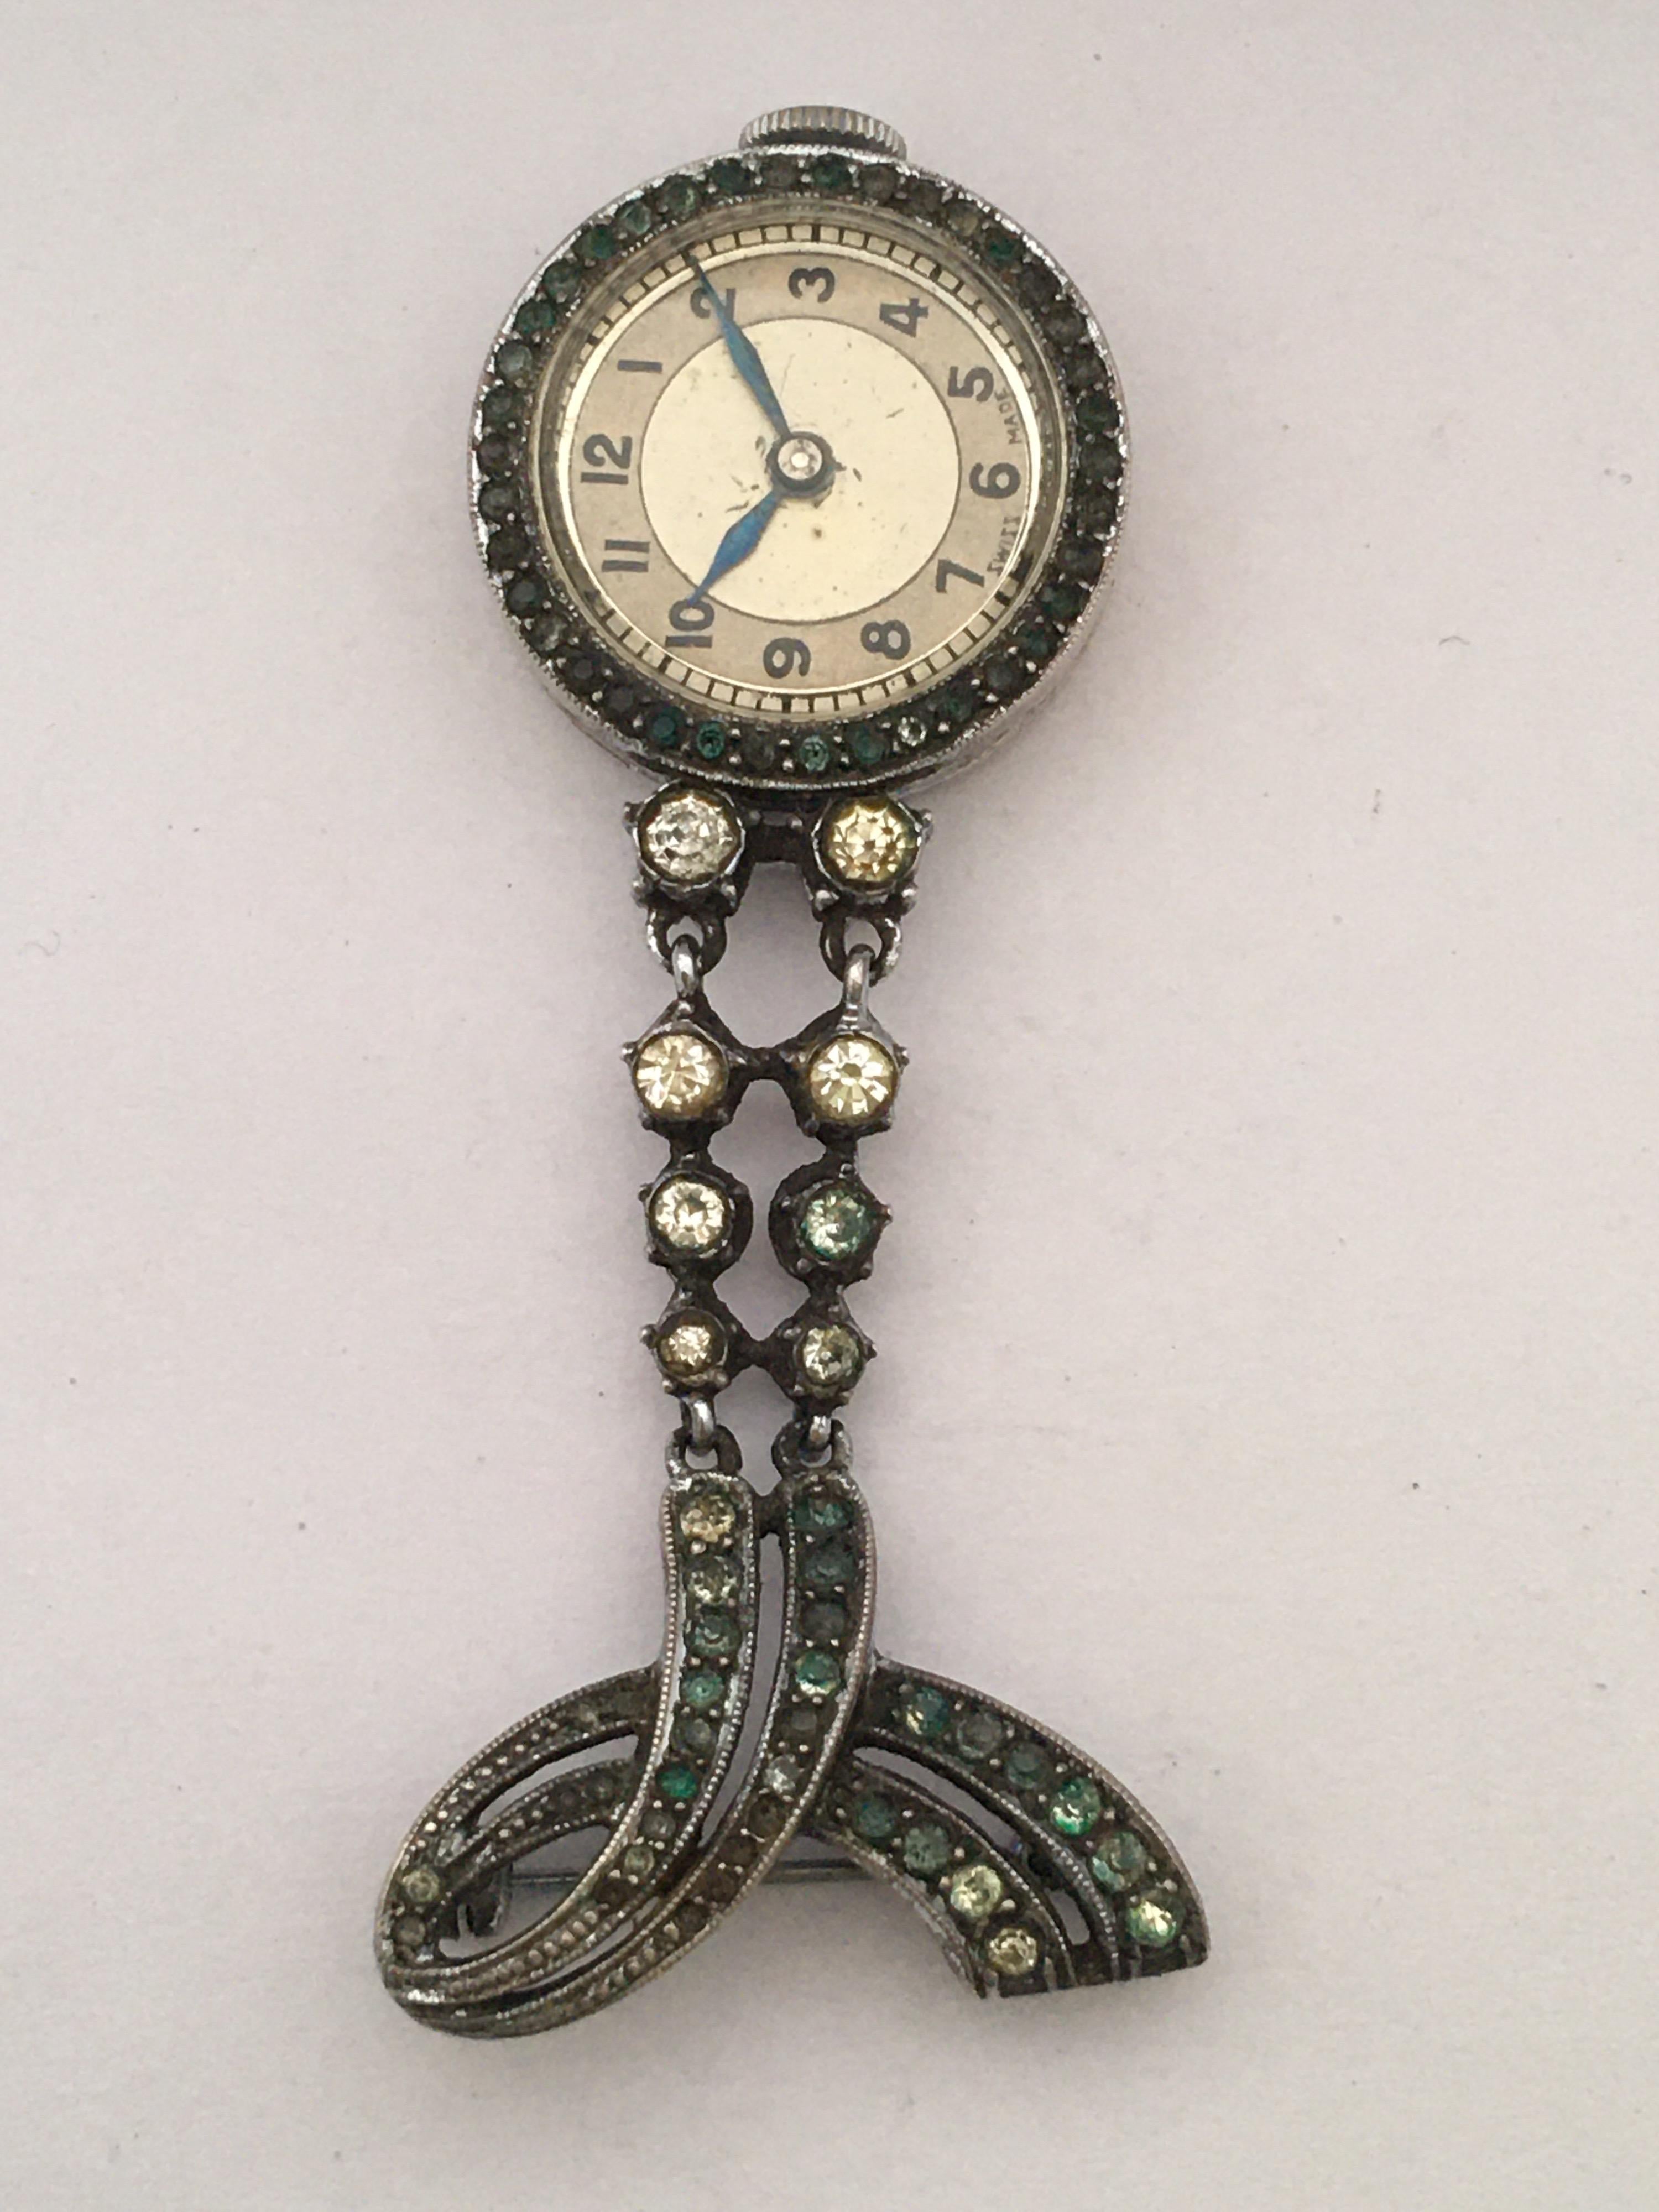 This beautiful vintage hand winding nurse’s watch is in good working condition and it is ticking well. It is recently been serviced and runs well. Visible signs of ageing and wear with light scratches and tarnishes on the watch case as shown. Some